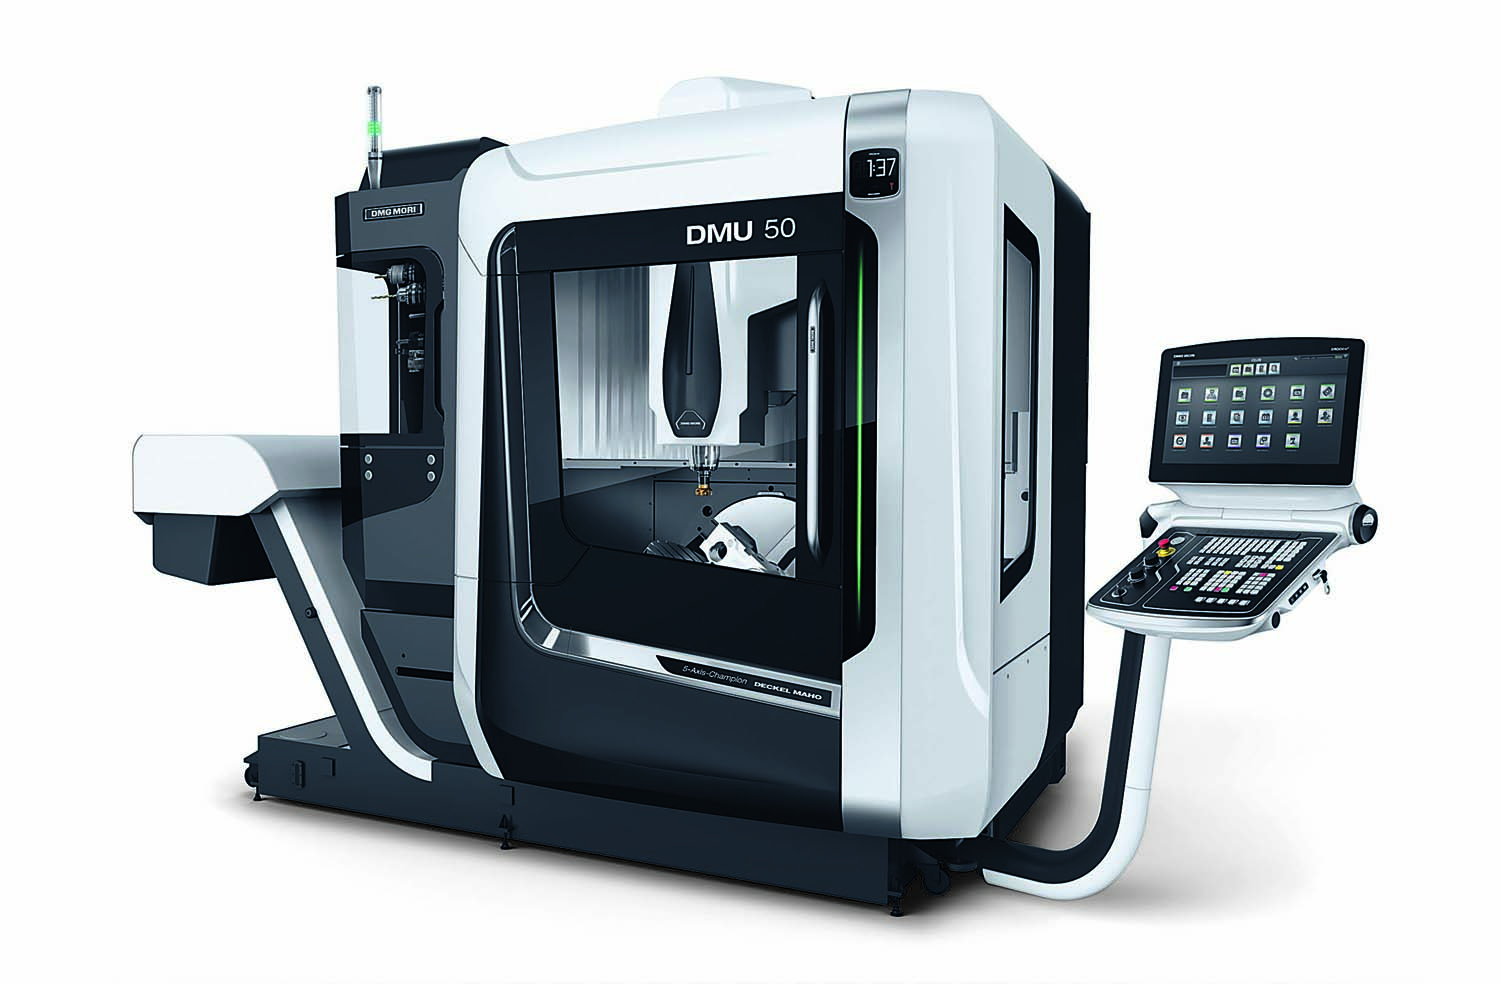 The third-generation DMU 50 is a universal milling machine with a swivel rotary table.